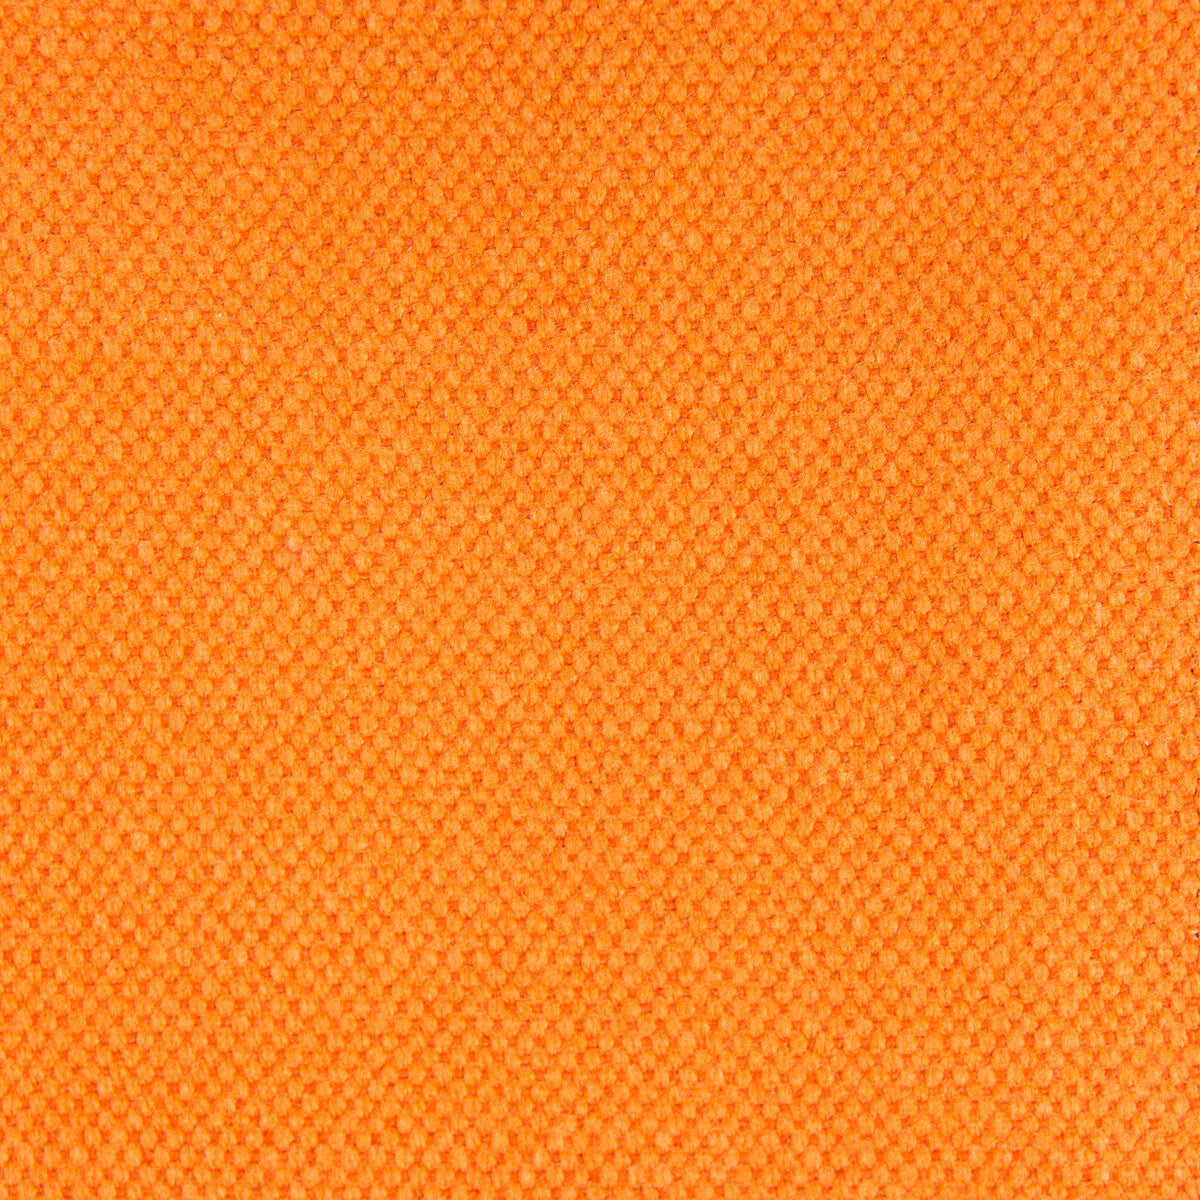 Lima fabric in naranja color - pattern GDT5616.013.0 - by Gaston y Daniela in the Gaston Nuevo Mundo collection